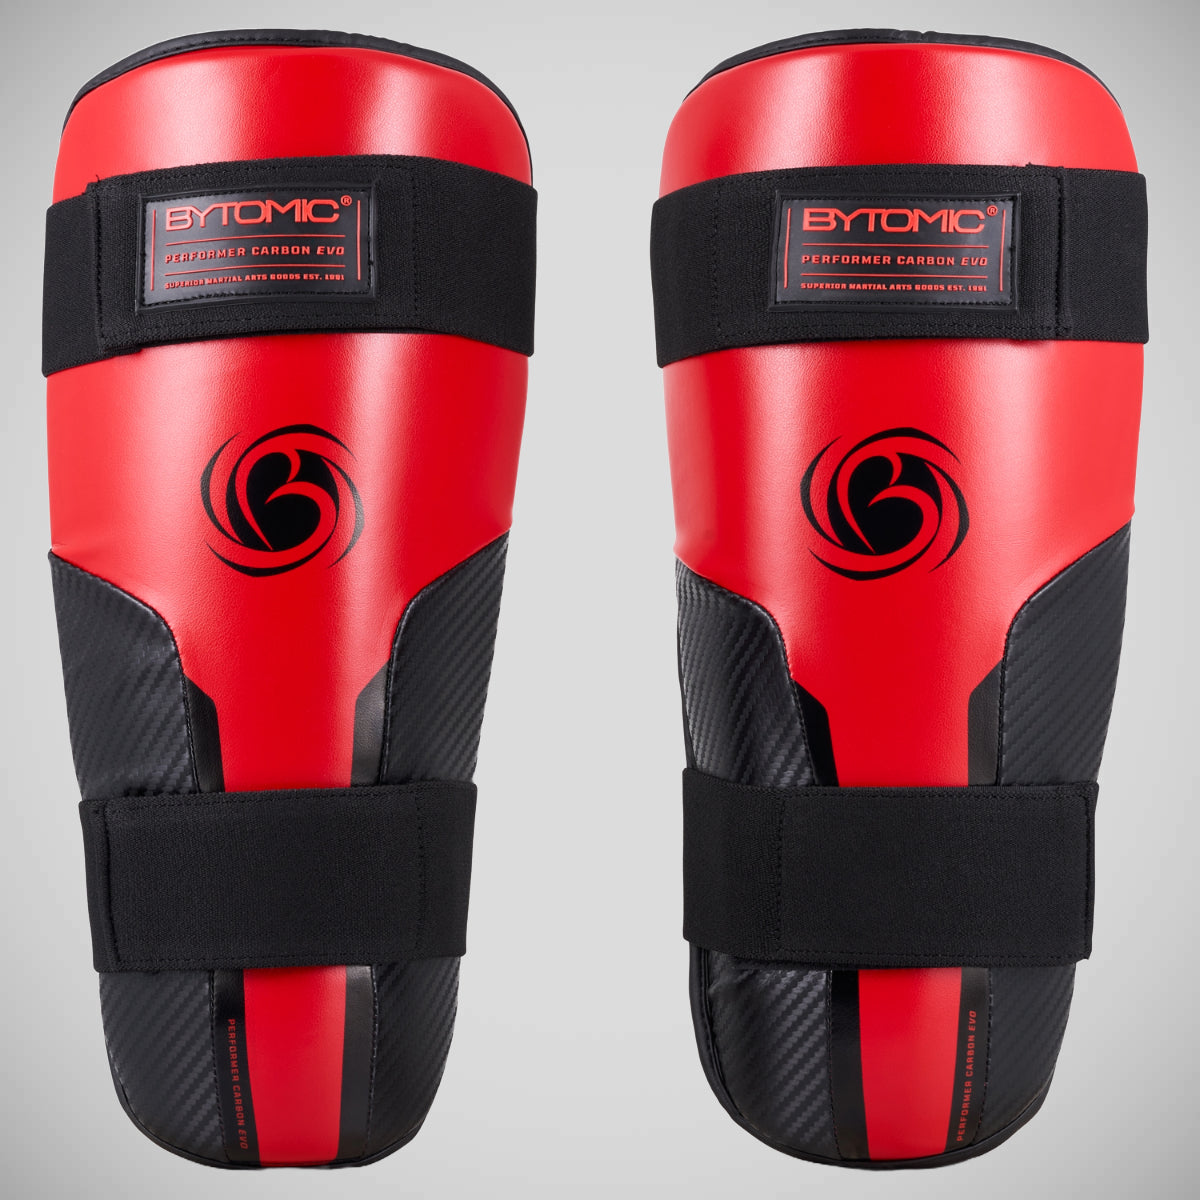 MMA Shin Guards from Made4Fighters